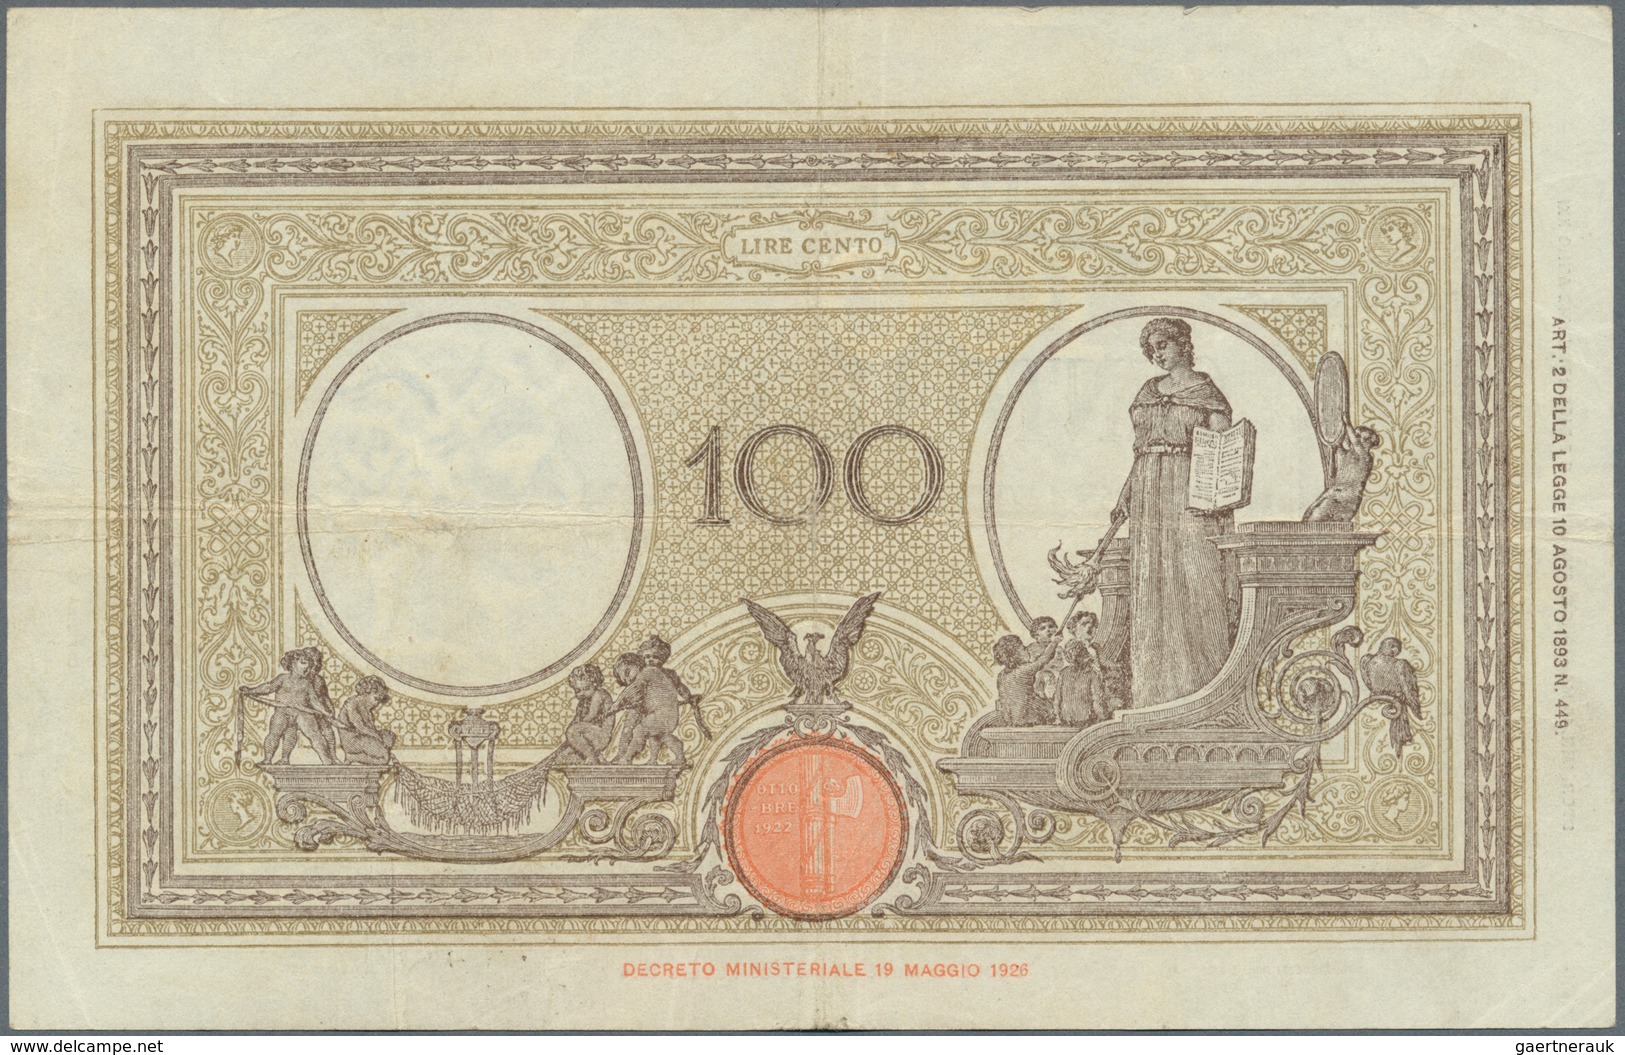 Italy / Italien: set of 5 notes 100 Lire 1942/43 P. 59, all notes in similar condition with light fo